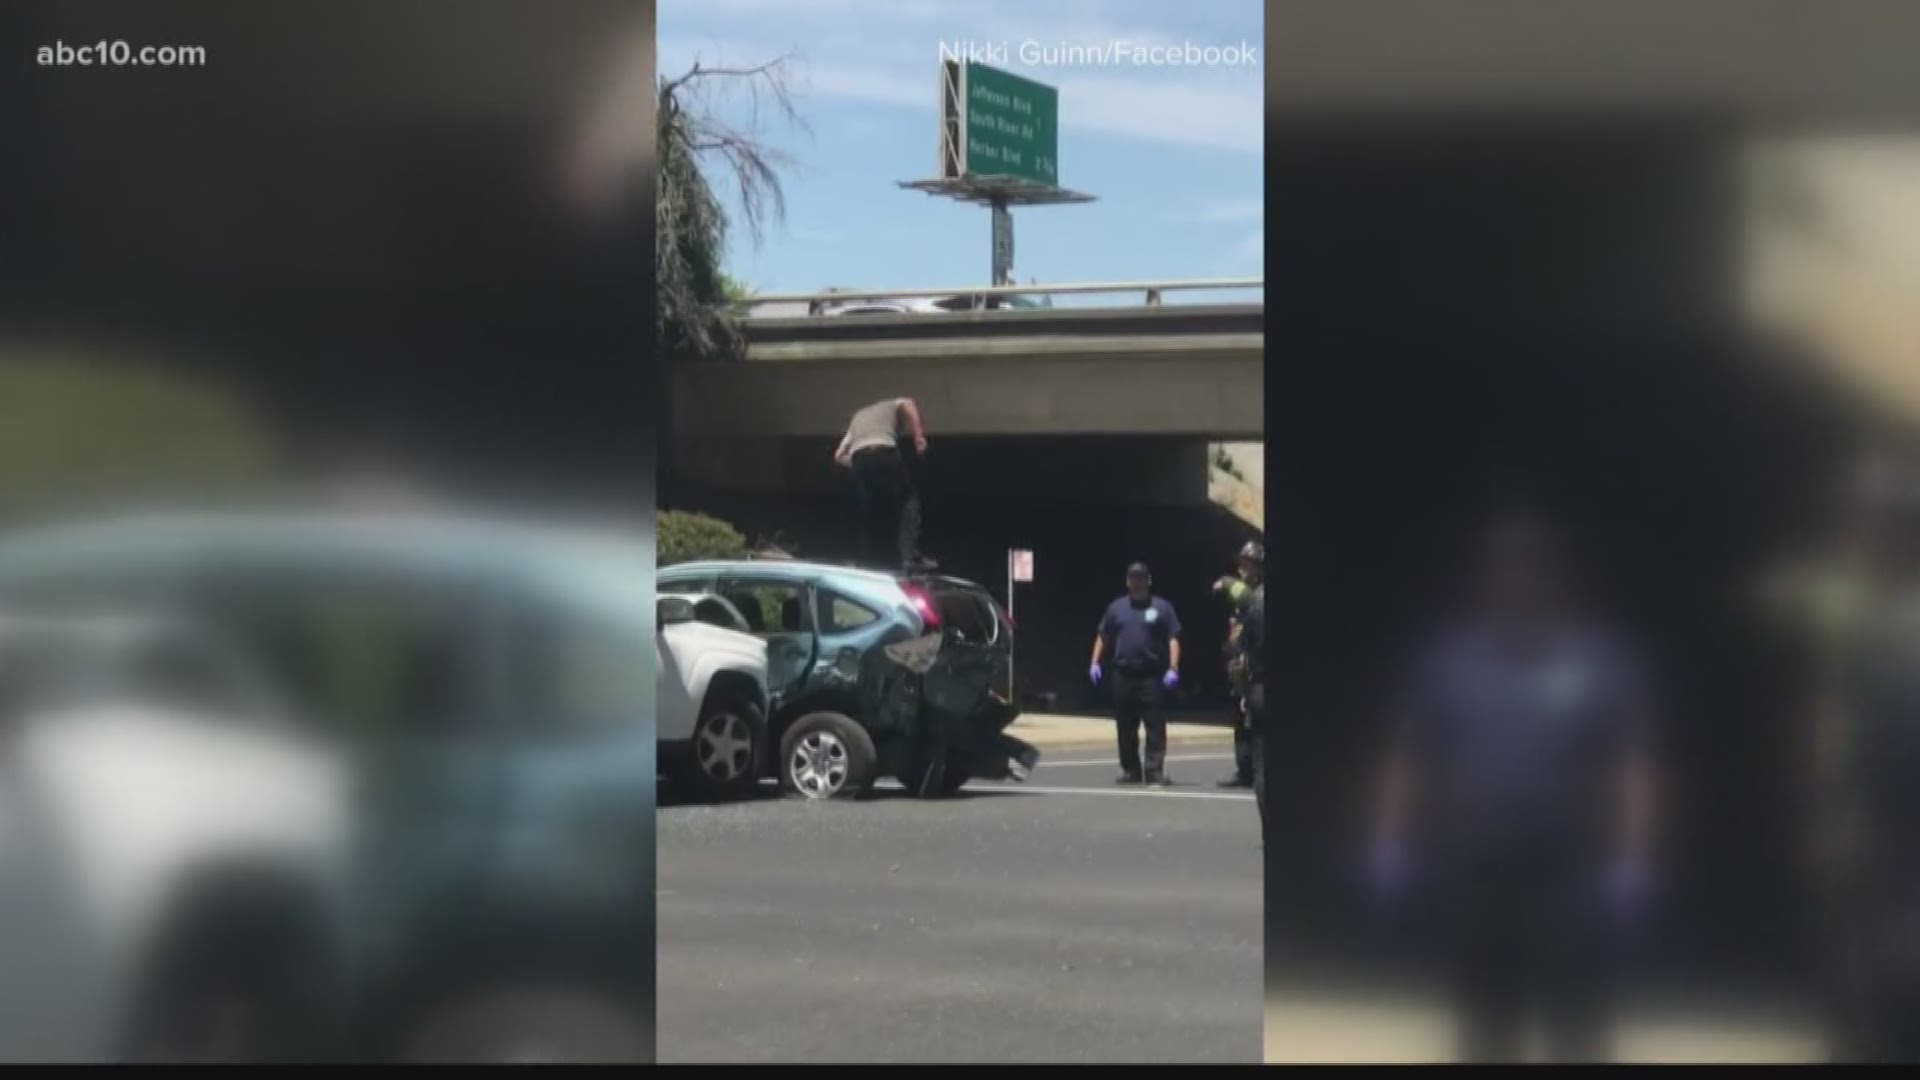 Cali Man Arrested For Road Rage After Ramming His Car Into Another Vehicle Several Times 